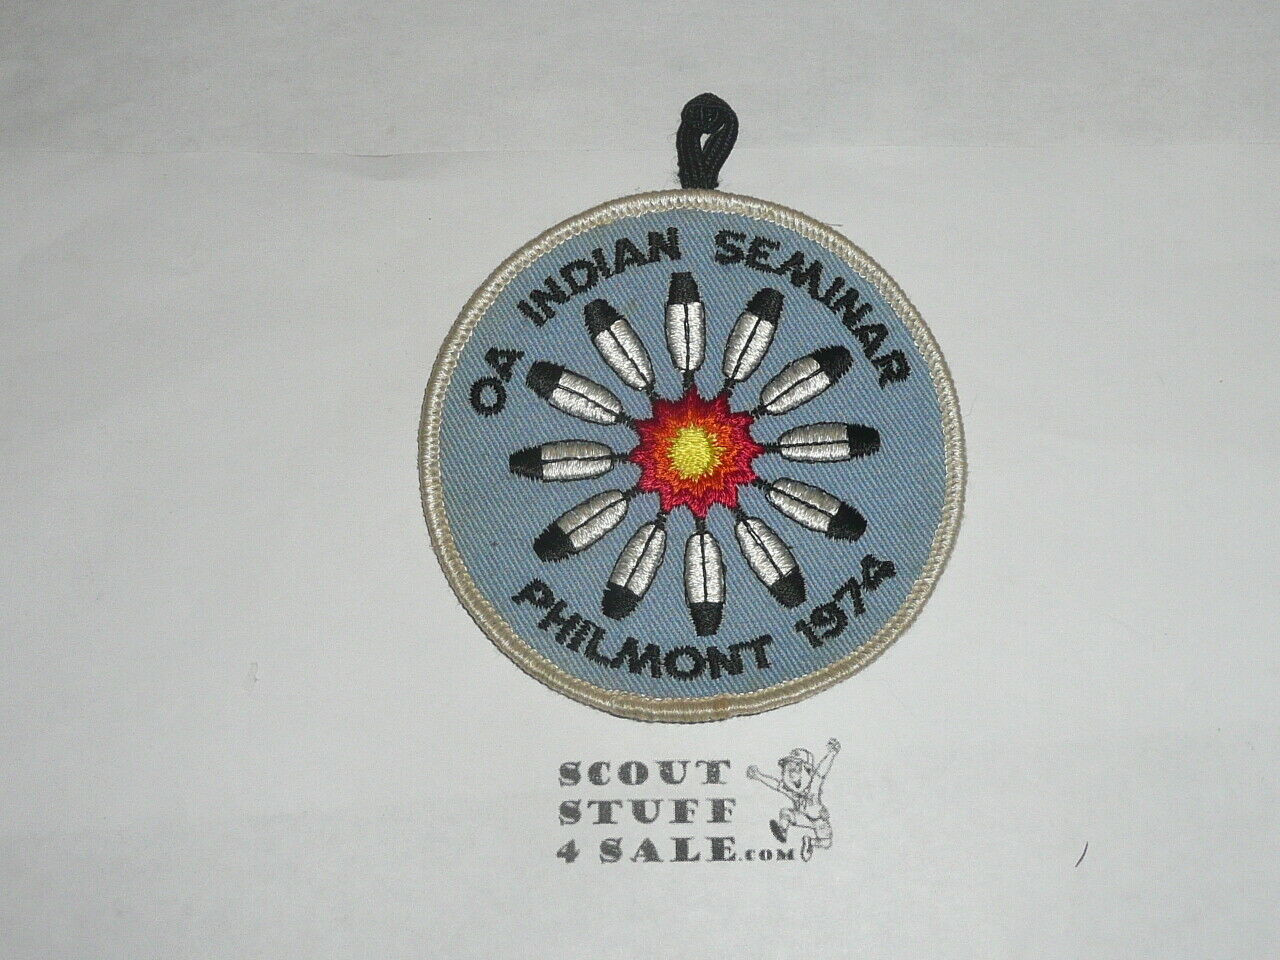 1974 Order of the Arrow Indian Seminar Patch, Held at Philmont - Boy Scout